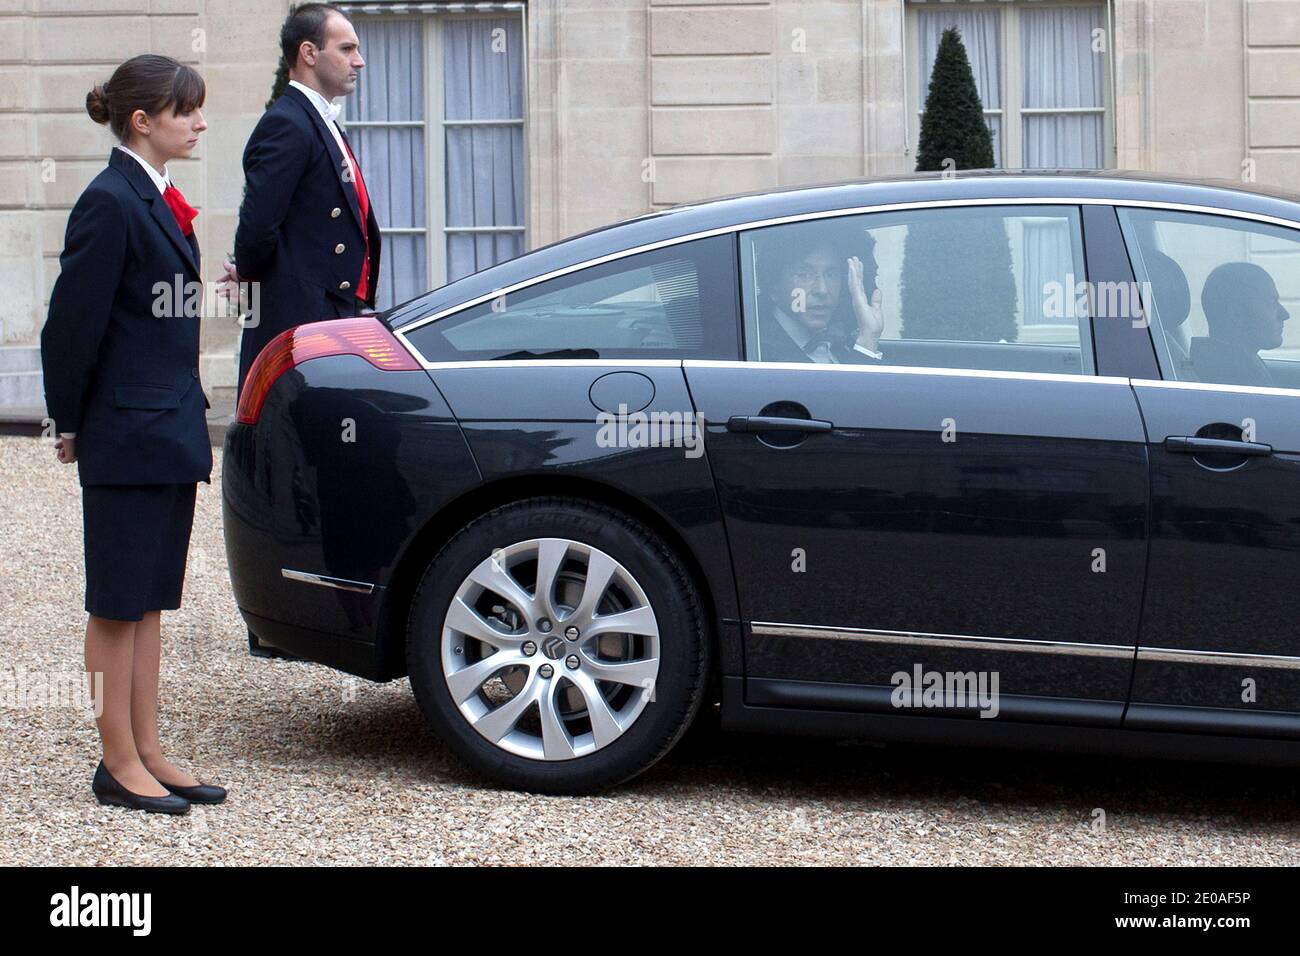 Belgium Prime Minister Elio Di Rupo salutes as he leaves the Elysee Palace after a meeting with French President Nicolas Sarkozy, in Paris, France on February 24, 2012. Photo by Stephane Lemouton/ABACAPRESS.COM. Stock Photo